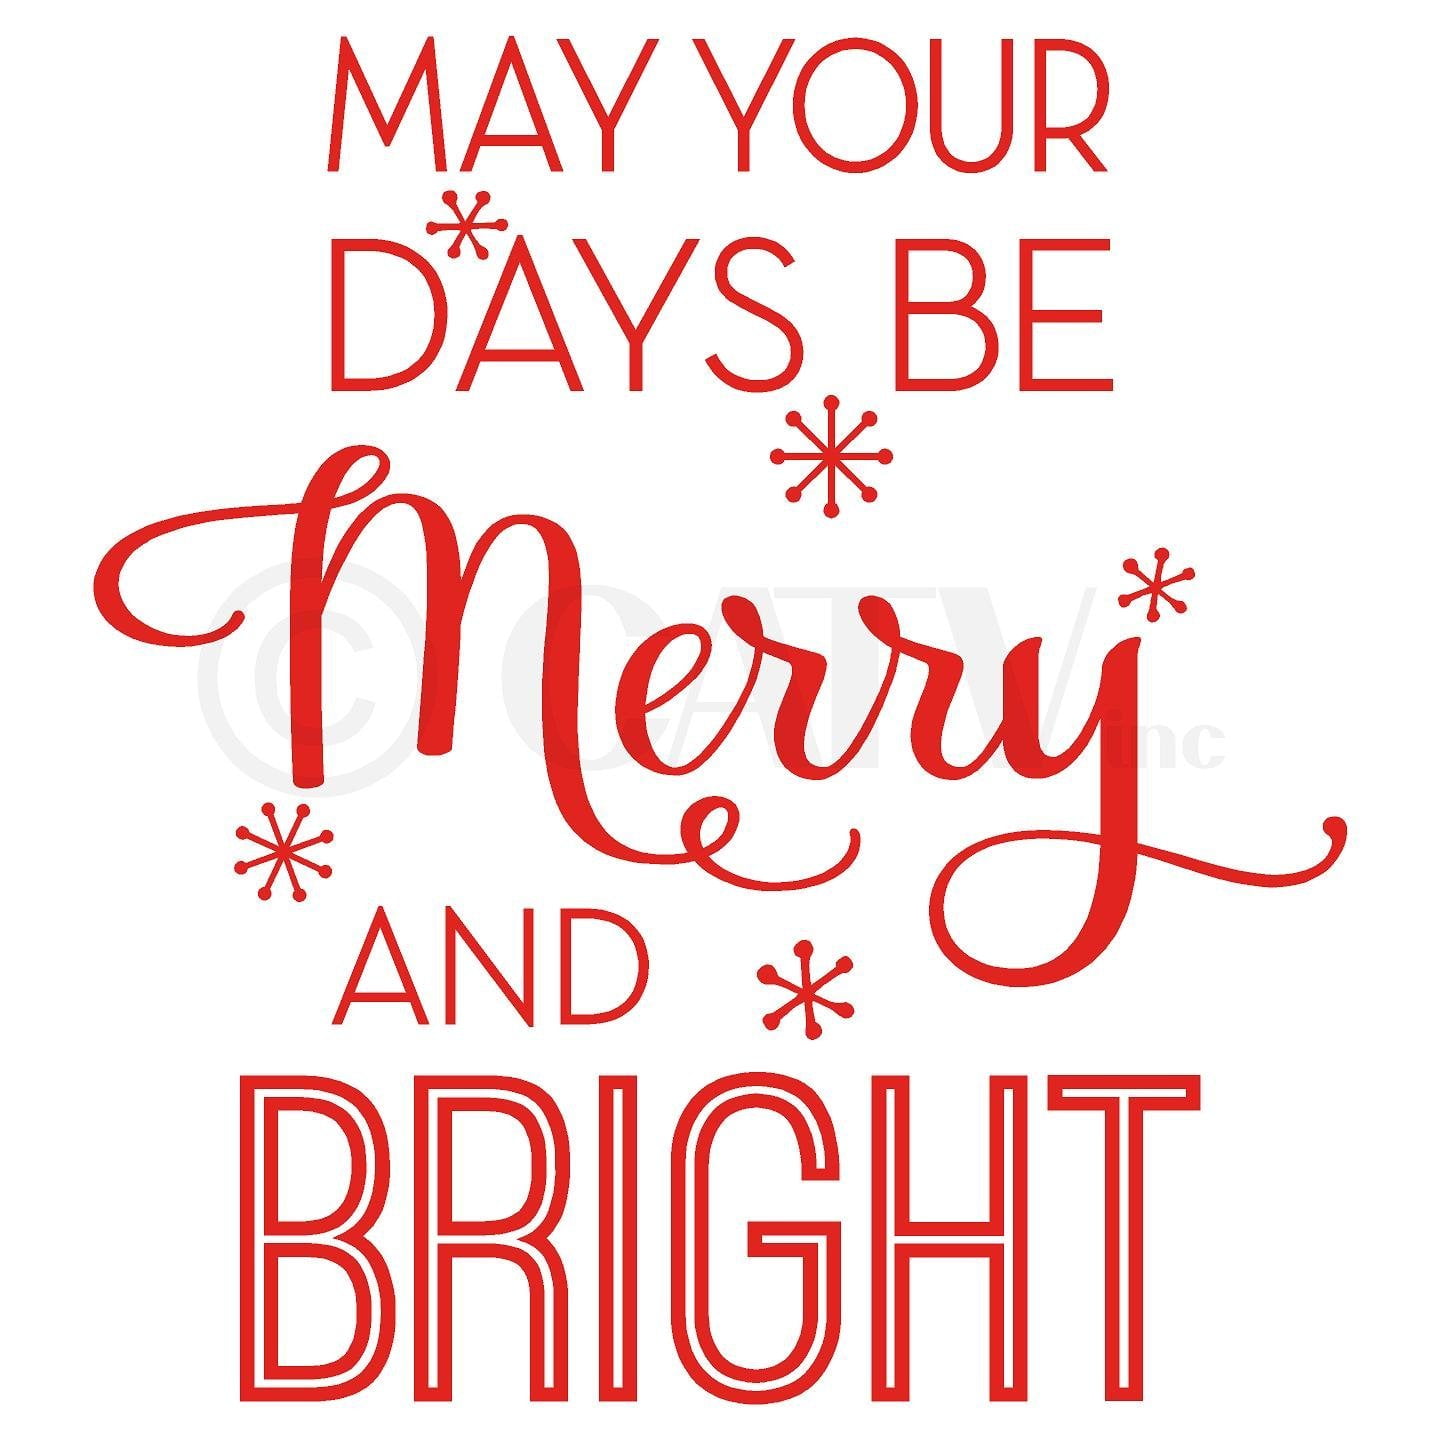 May-Your-Days-be-Merry-and-Bright-BA579PU